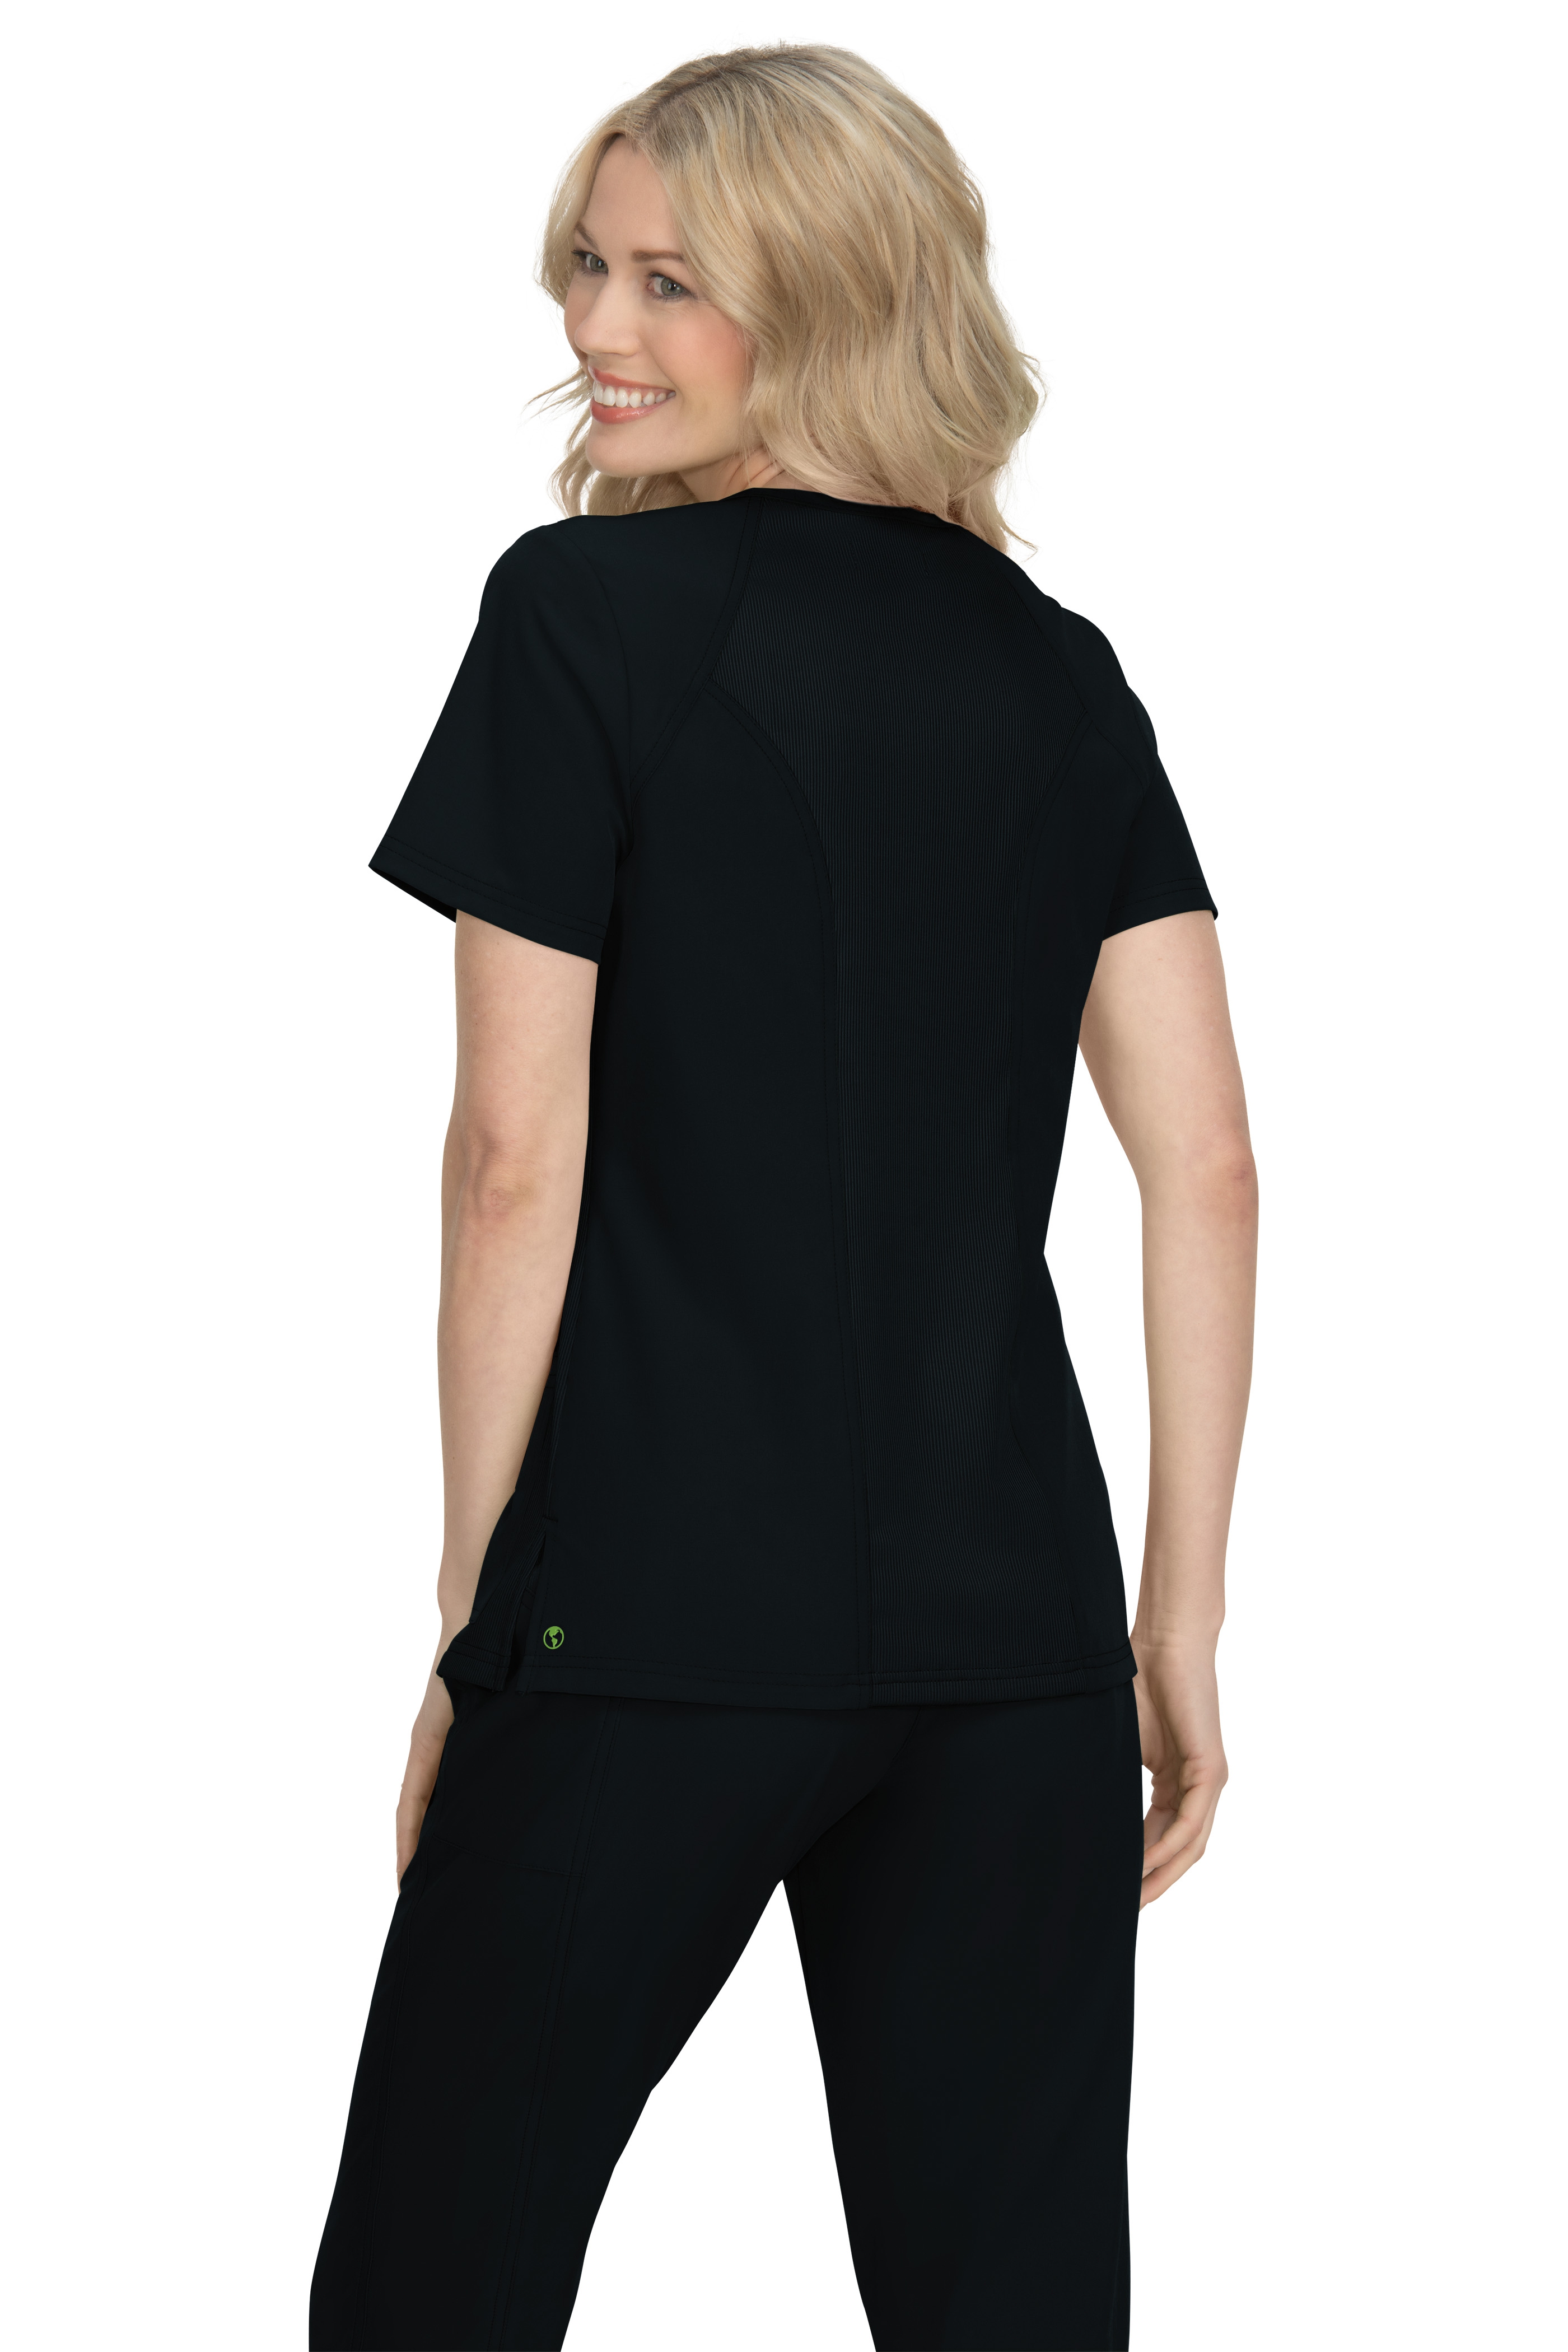 wo-fusoul Black and Friday Deals Womens Scrubs Tops Plus Size